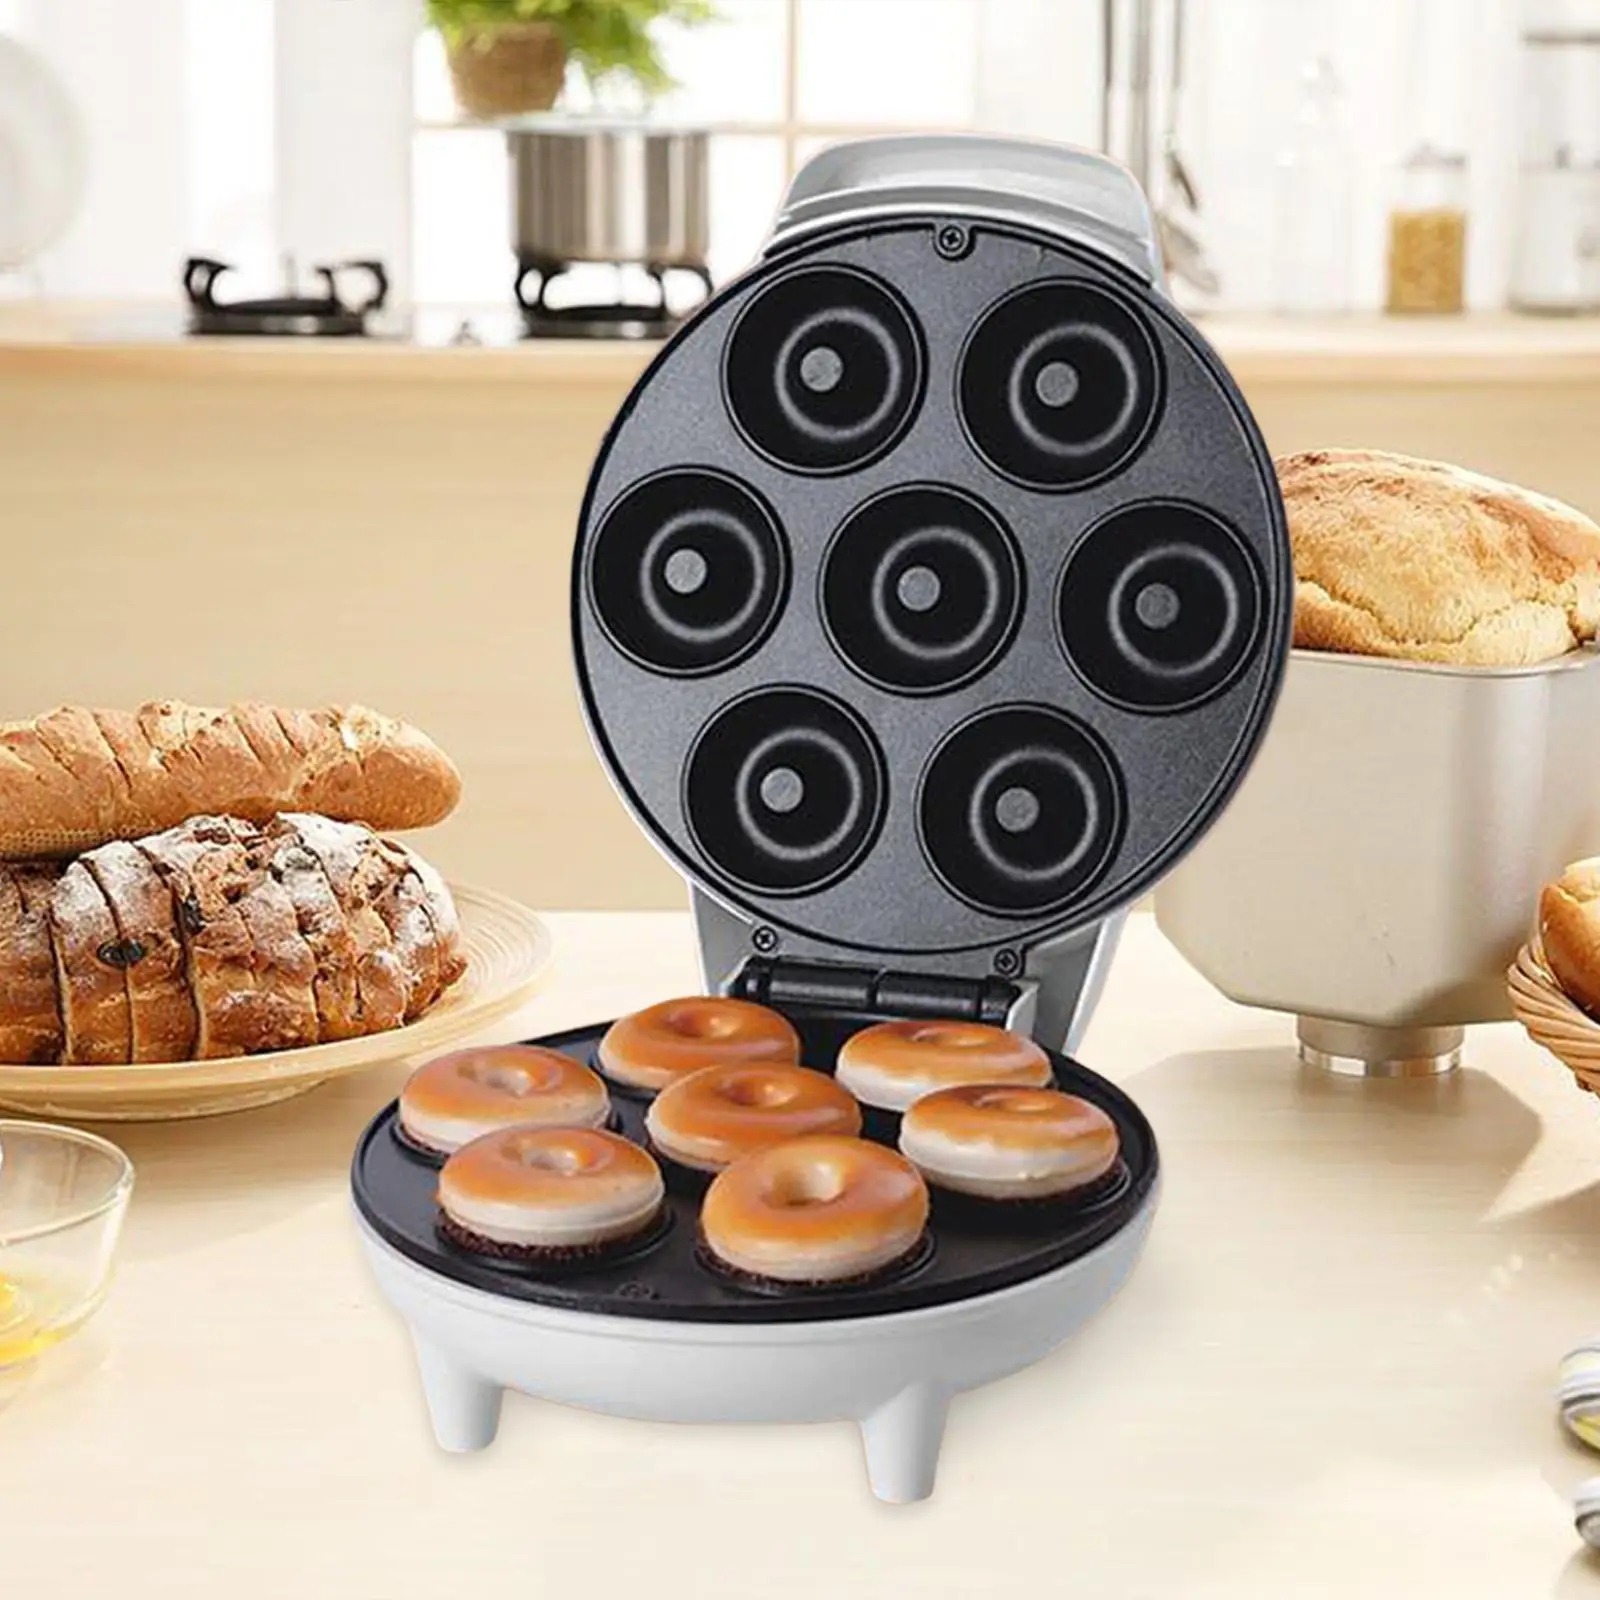 Mini Donut Maker Easy to Clean Deep Cooking Plates Kid Friendly Makes 7 Doughnuts Breakfast Machine Waffle Machine for Household